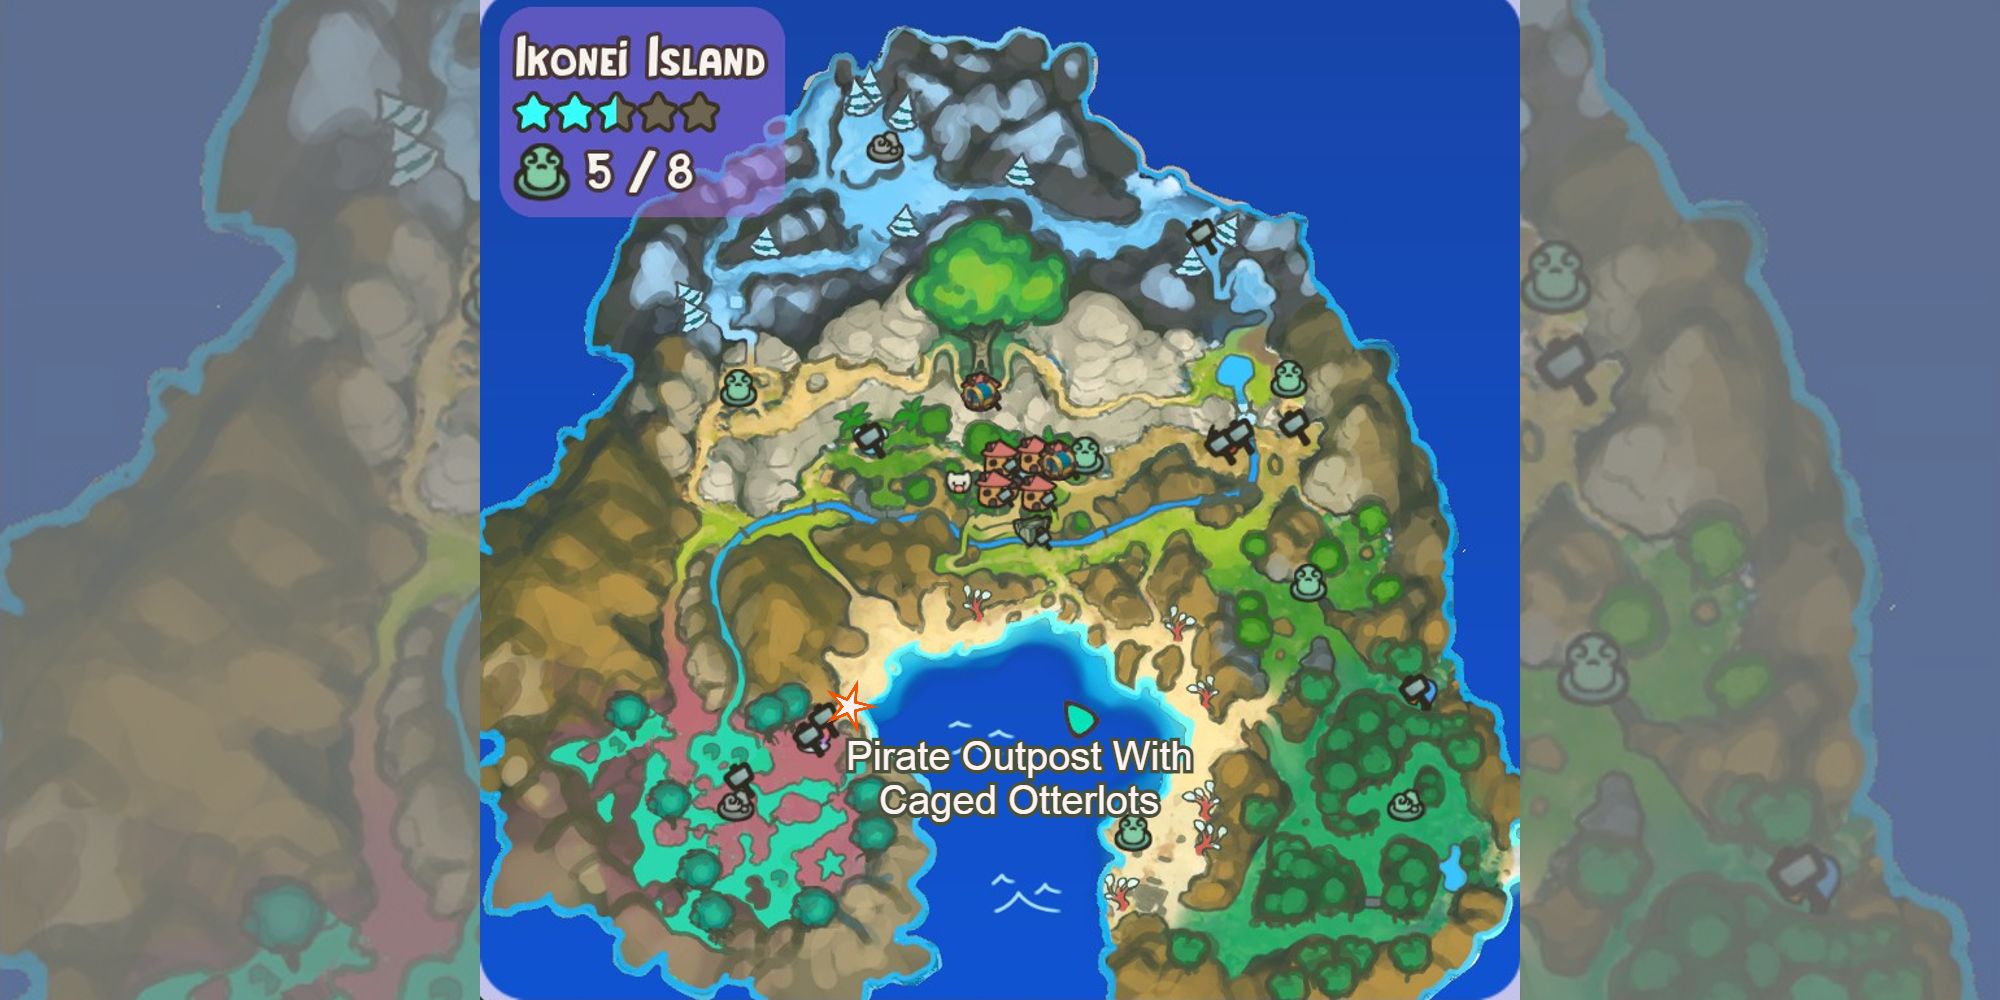 pirate outpost with caged otterlot location marked on map